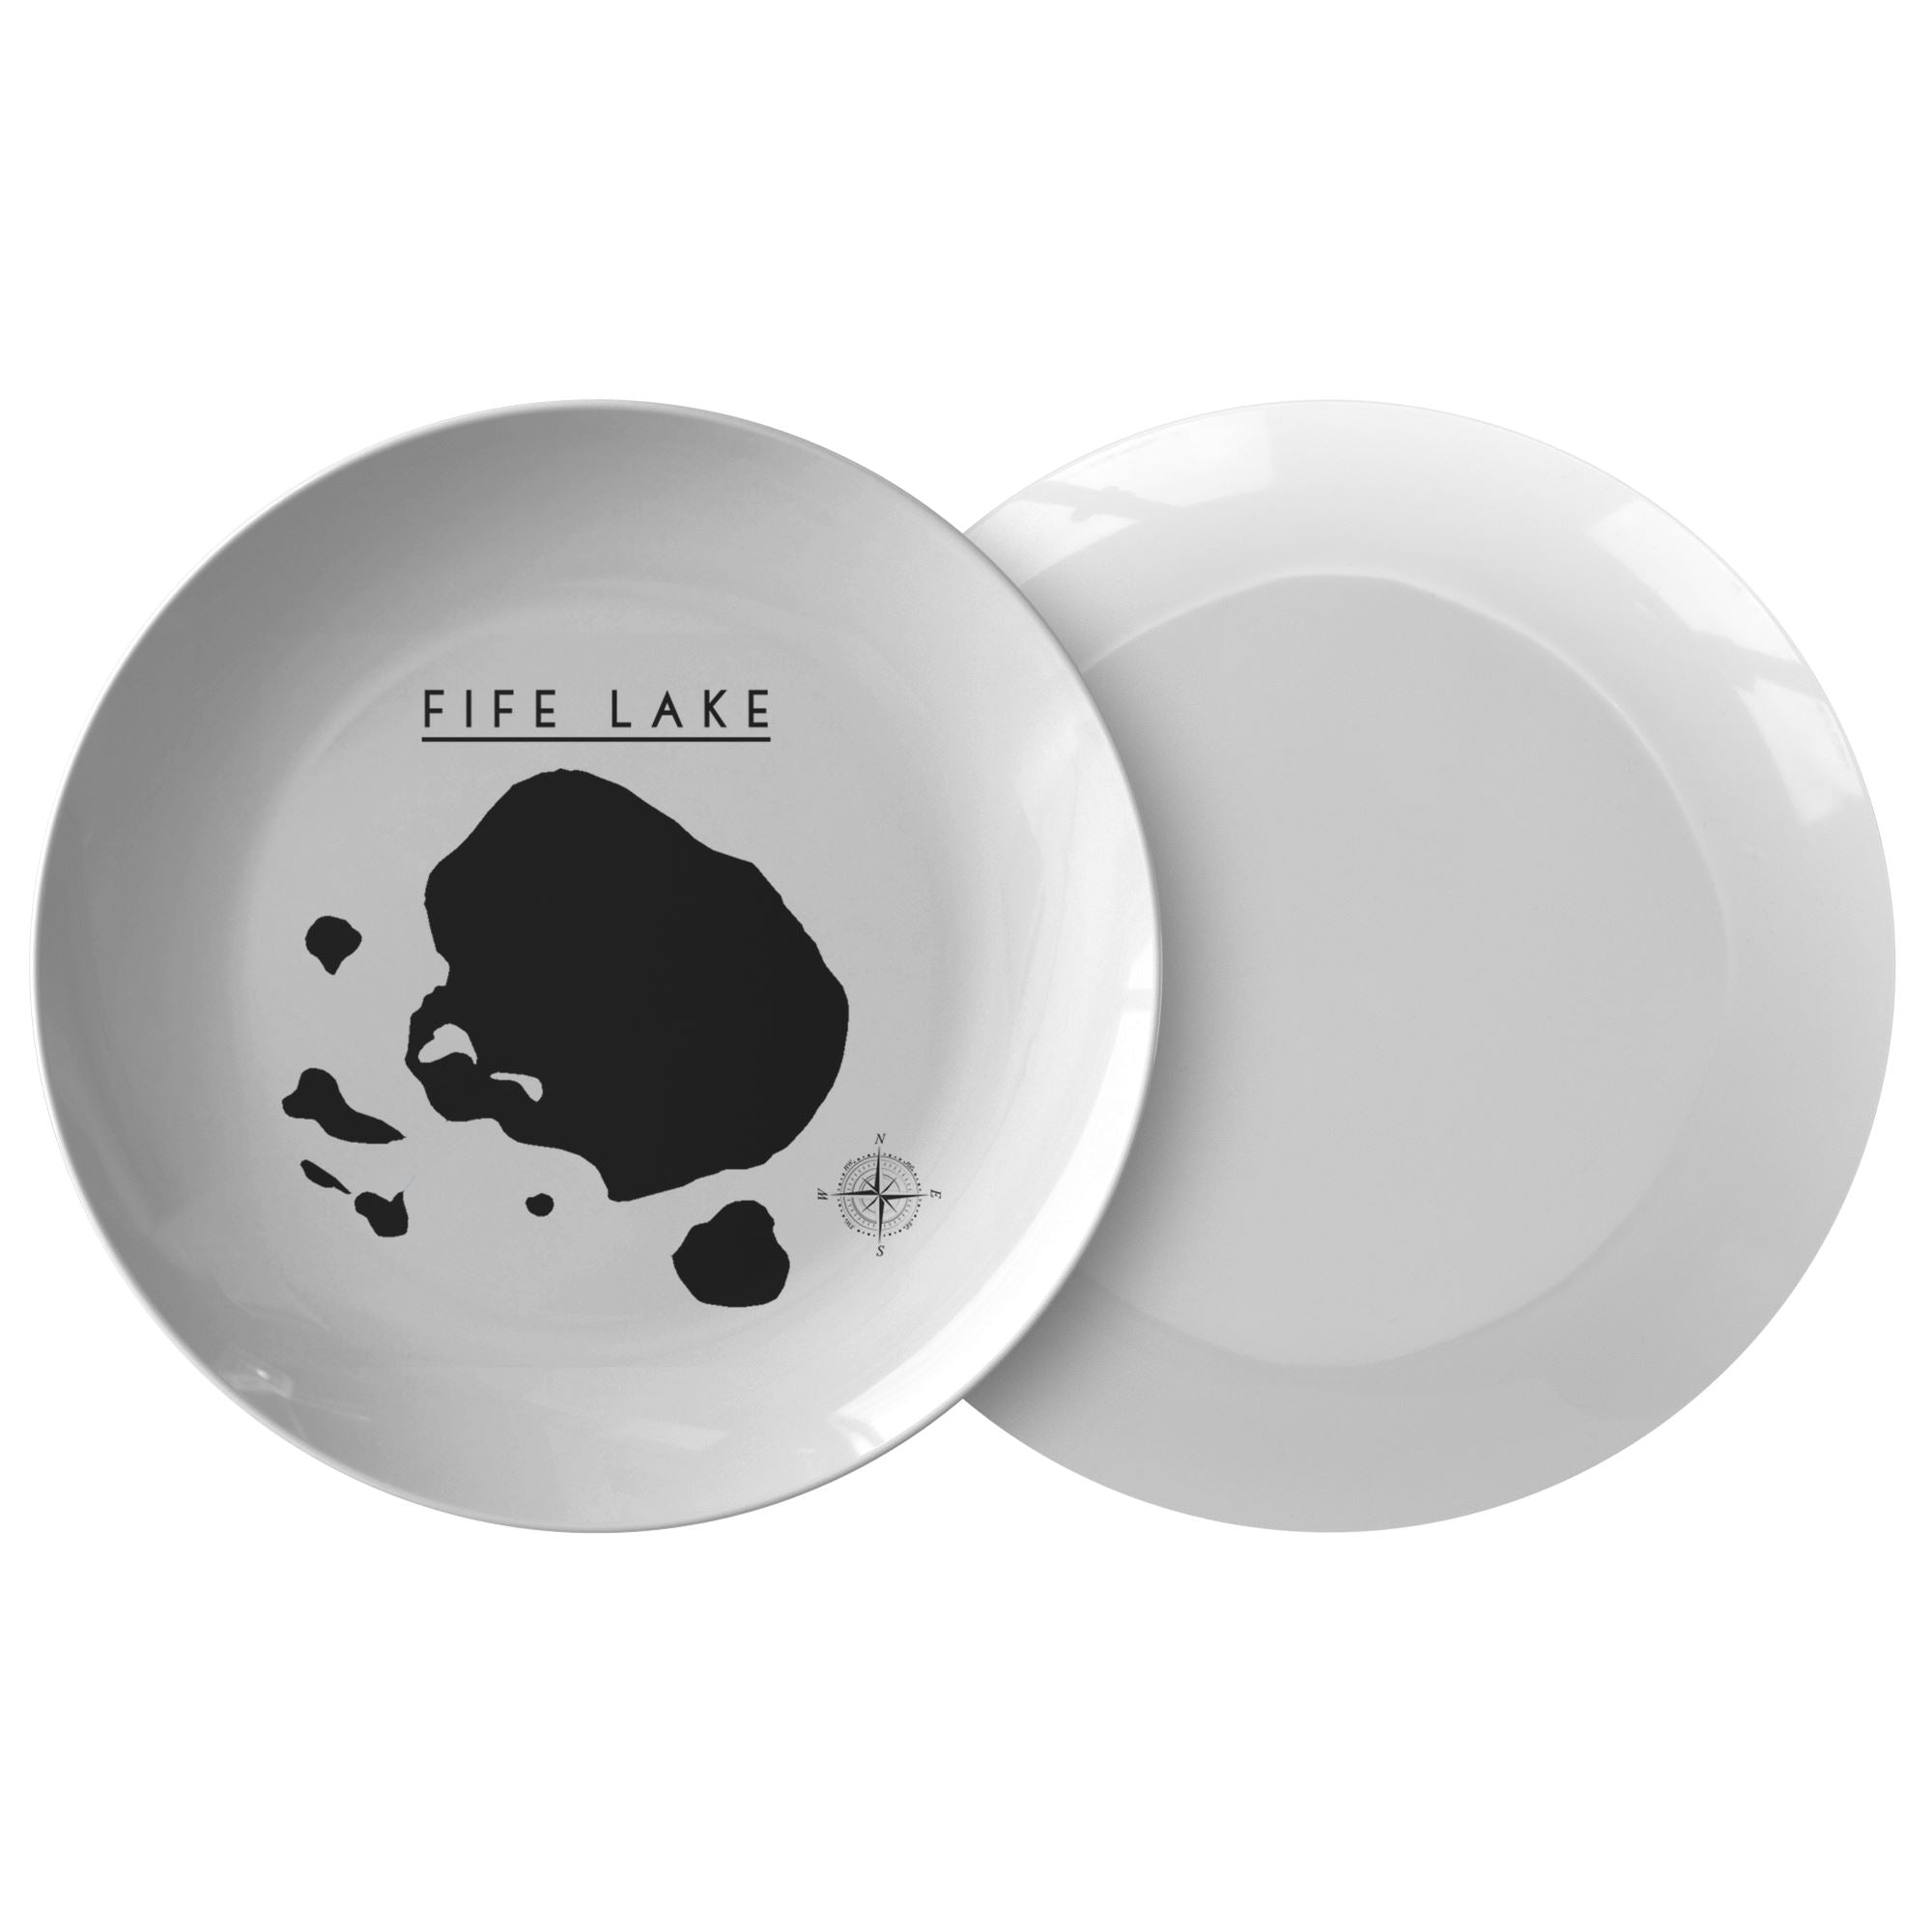 Fife Lake Map Plate, Lake Gift, Printed, Valentines Day Gift For Boaters, Microwave Safe Polymer Plastic (No Melamine), Dinner Plate Dinnerware 